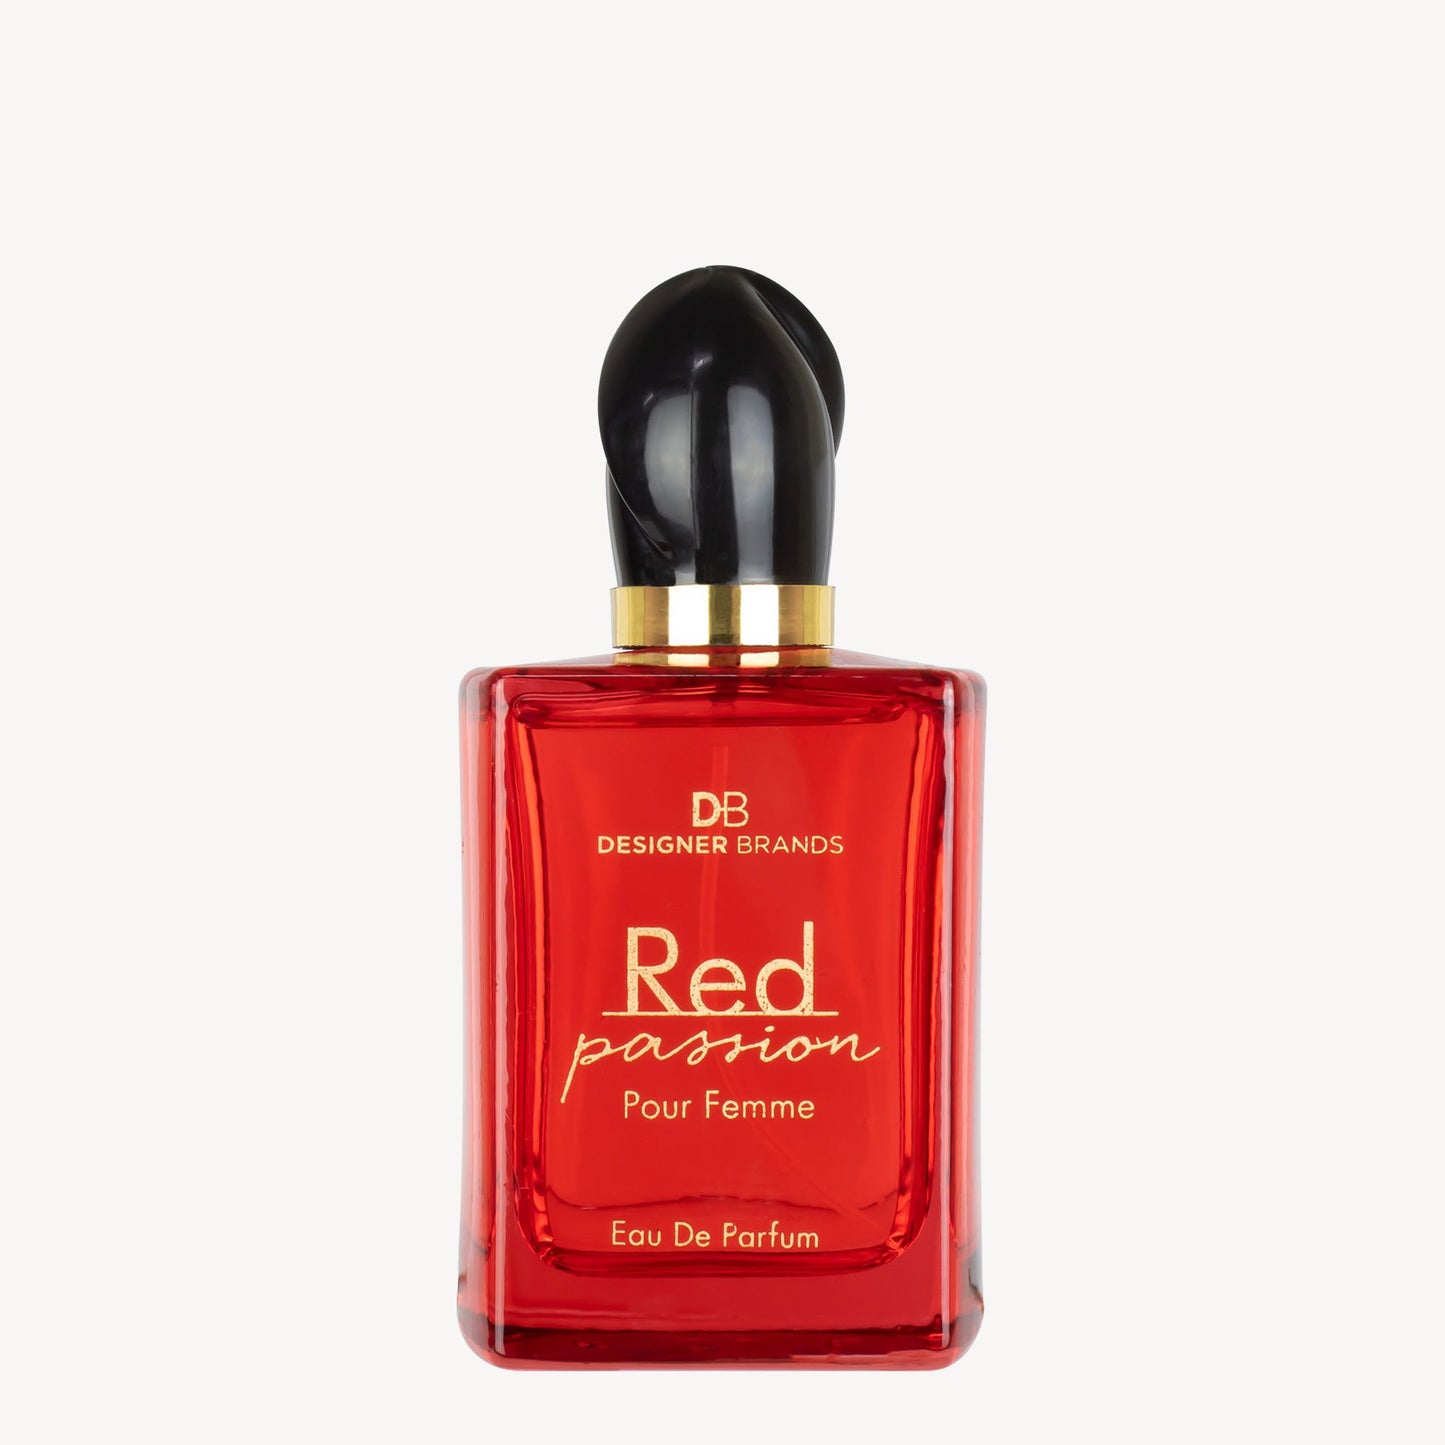 Red Passion for Women (EDP) 100ml Fragrance